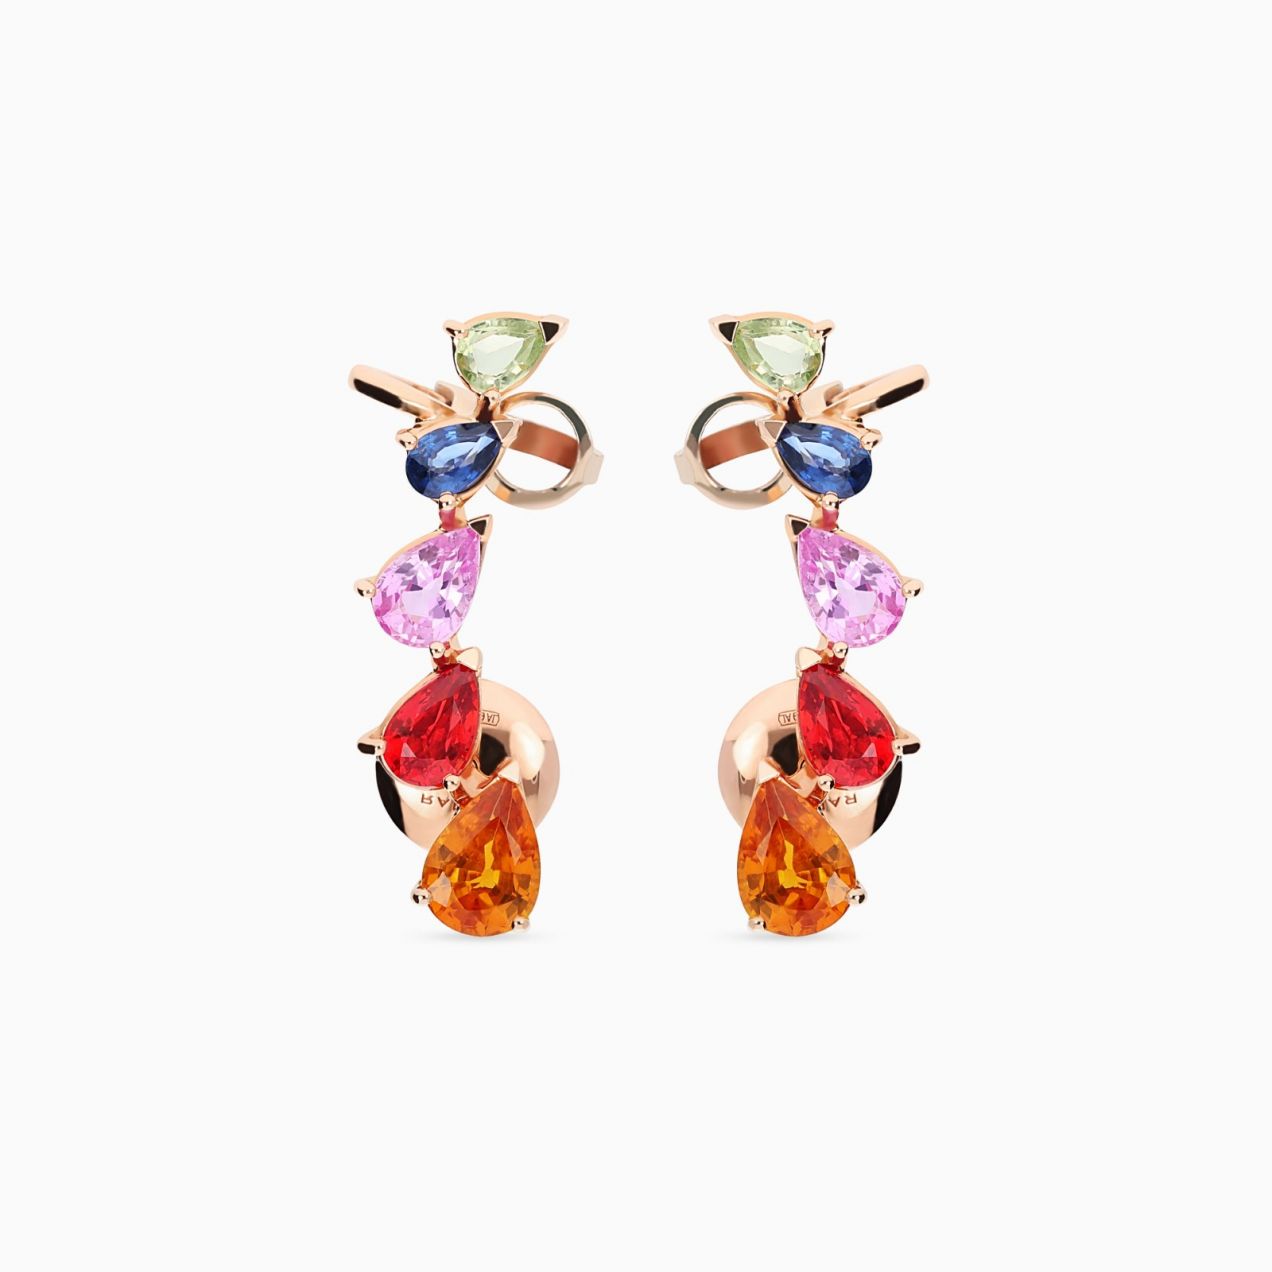 Rose gold earcuffs earrings with pear-cut multicoloured sapphires